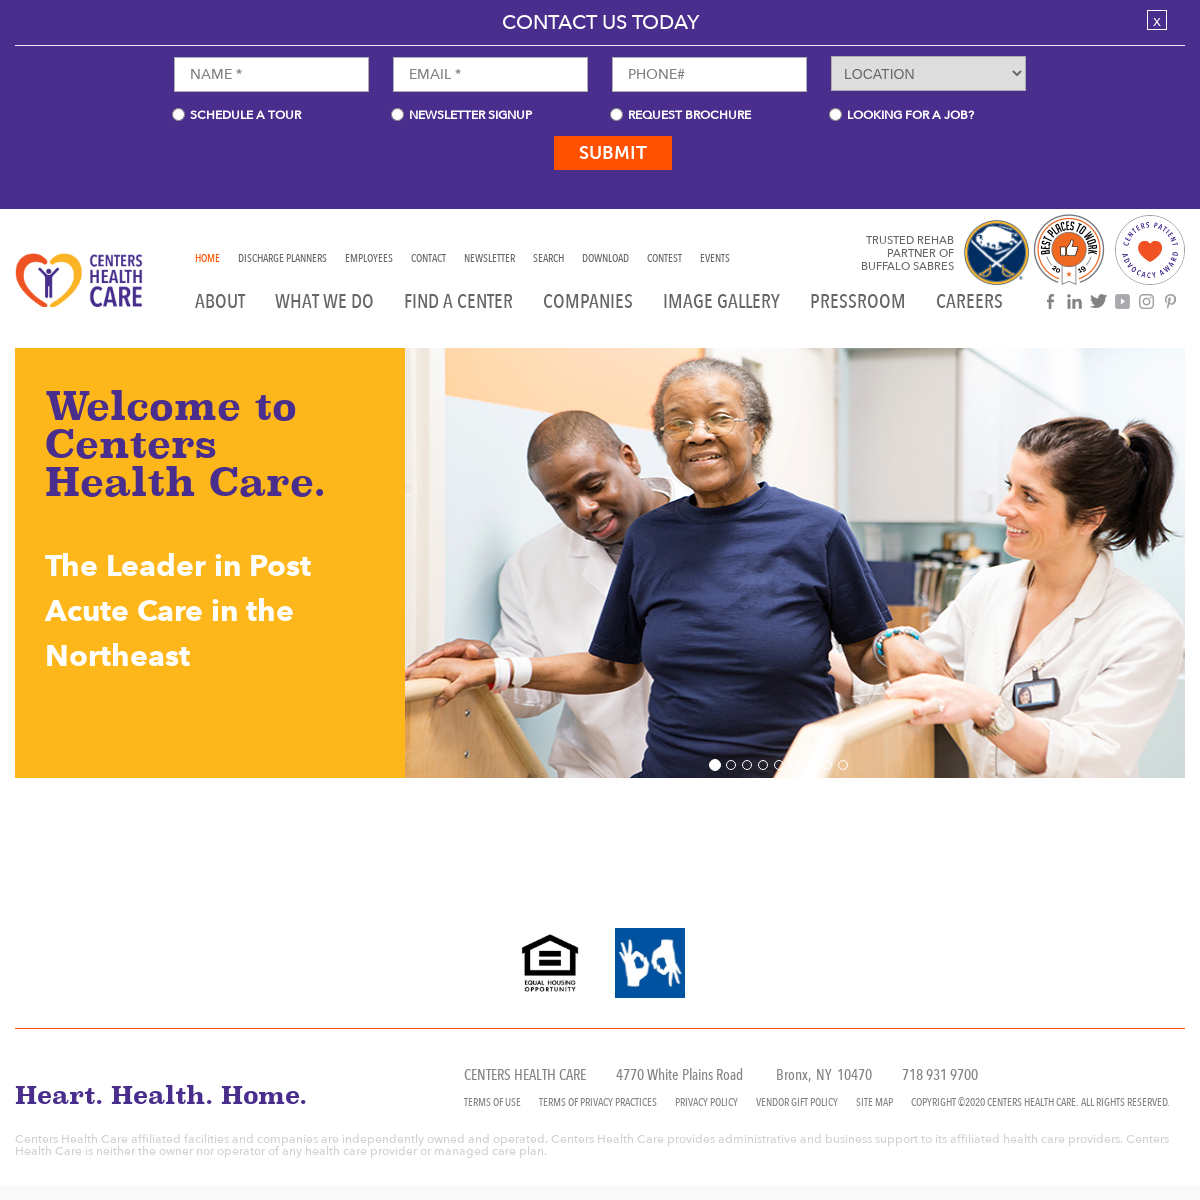 A complete backup of centershealthcare.com